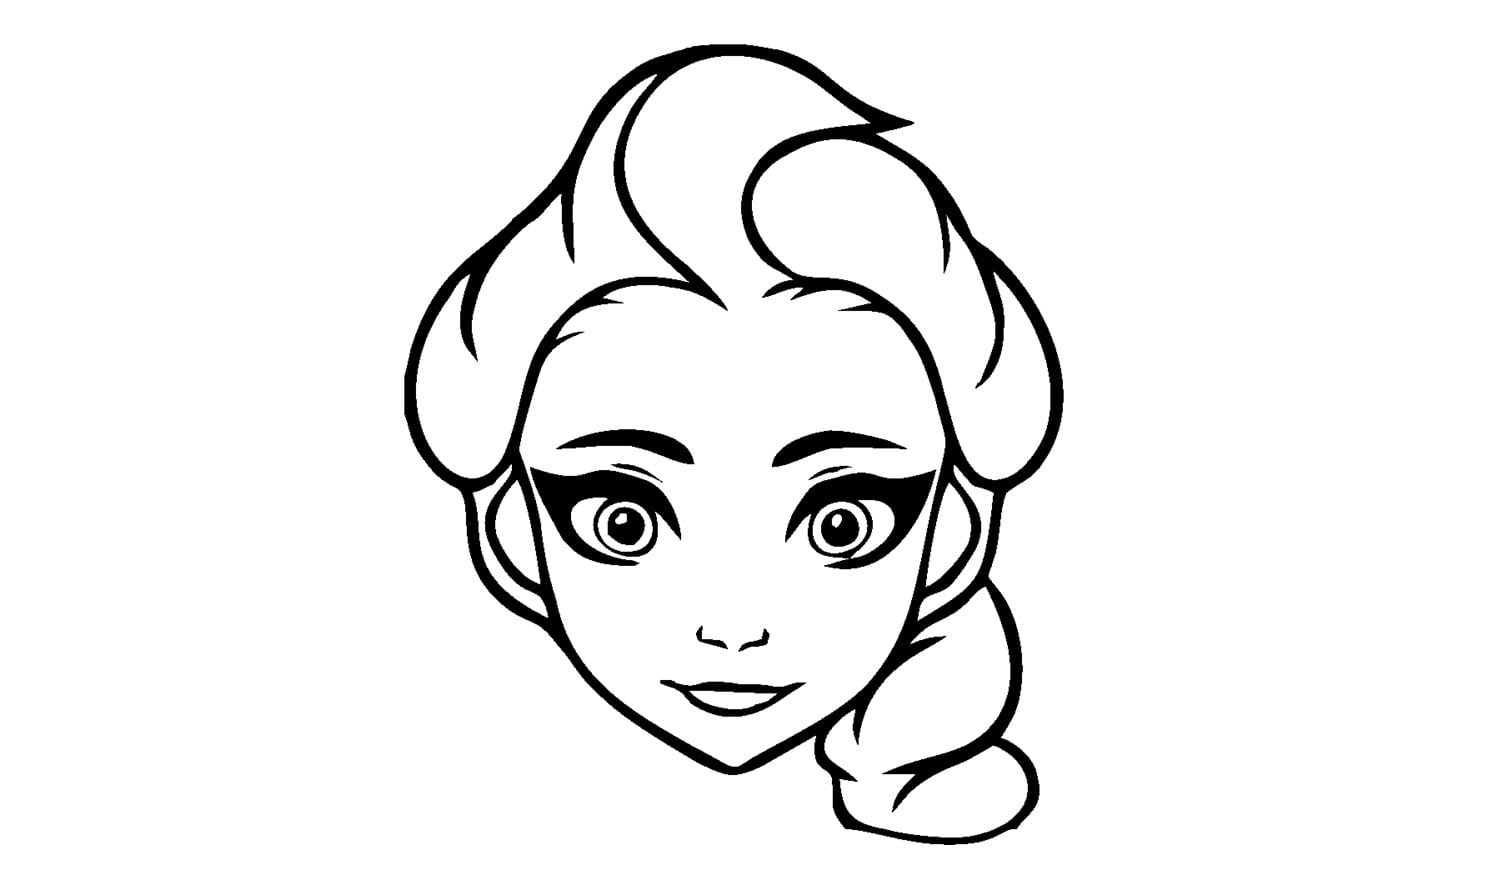 How To Draw Elsa From Frozen (character)